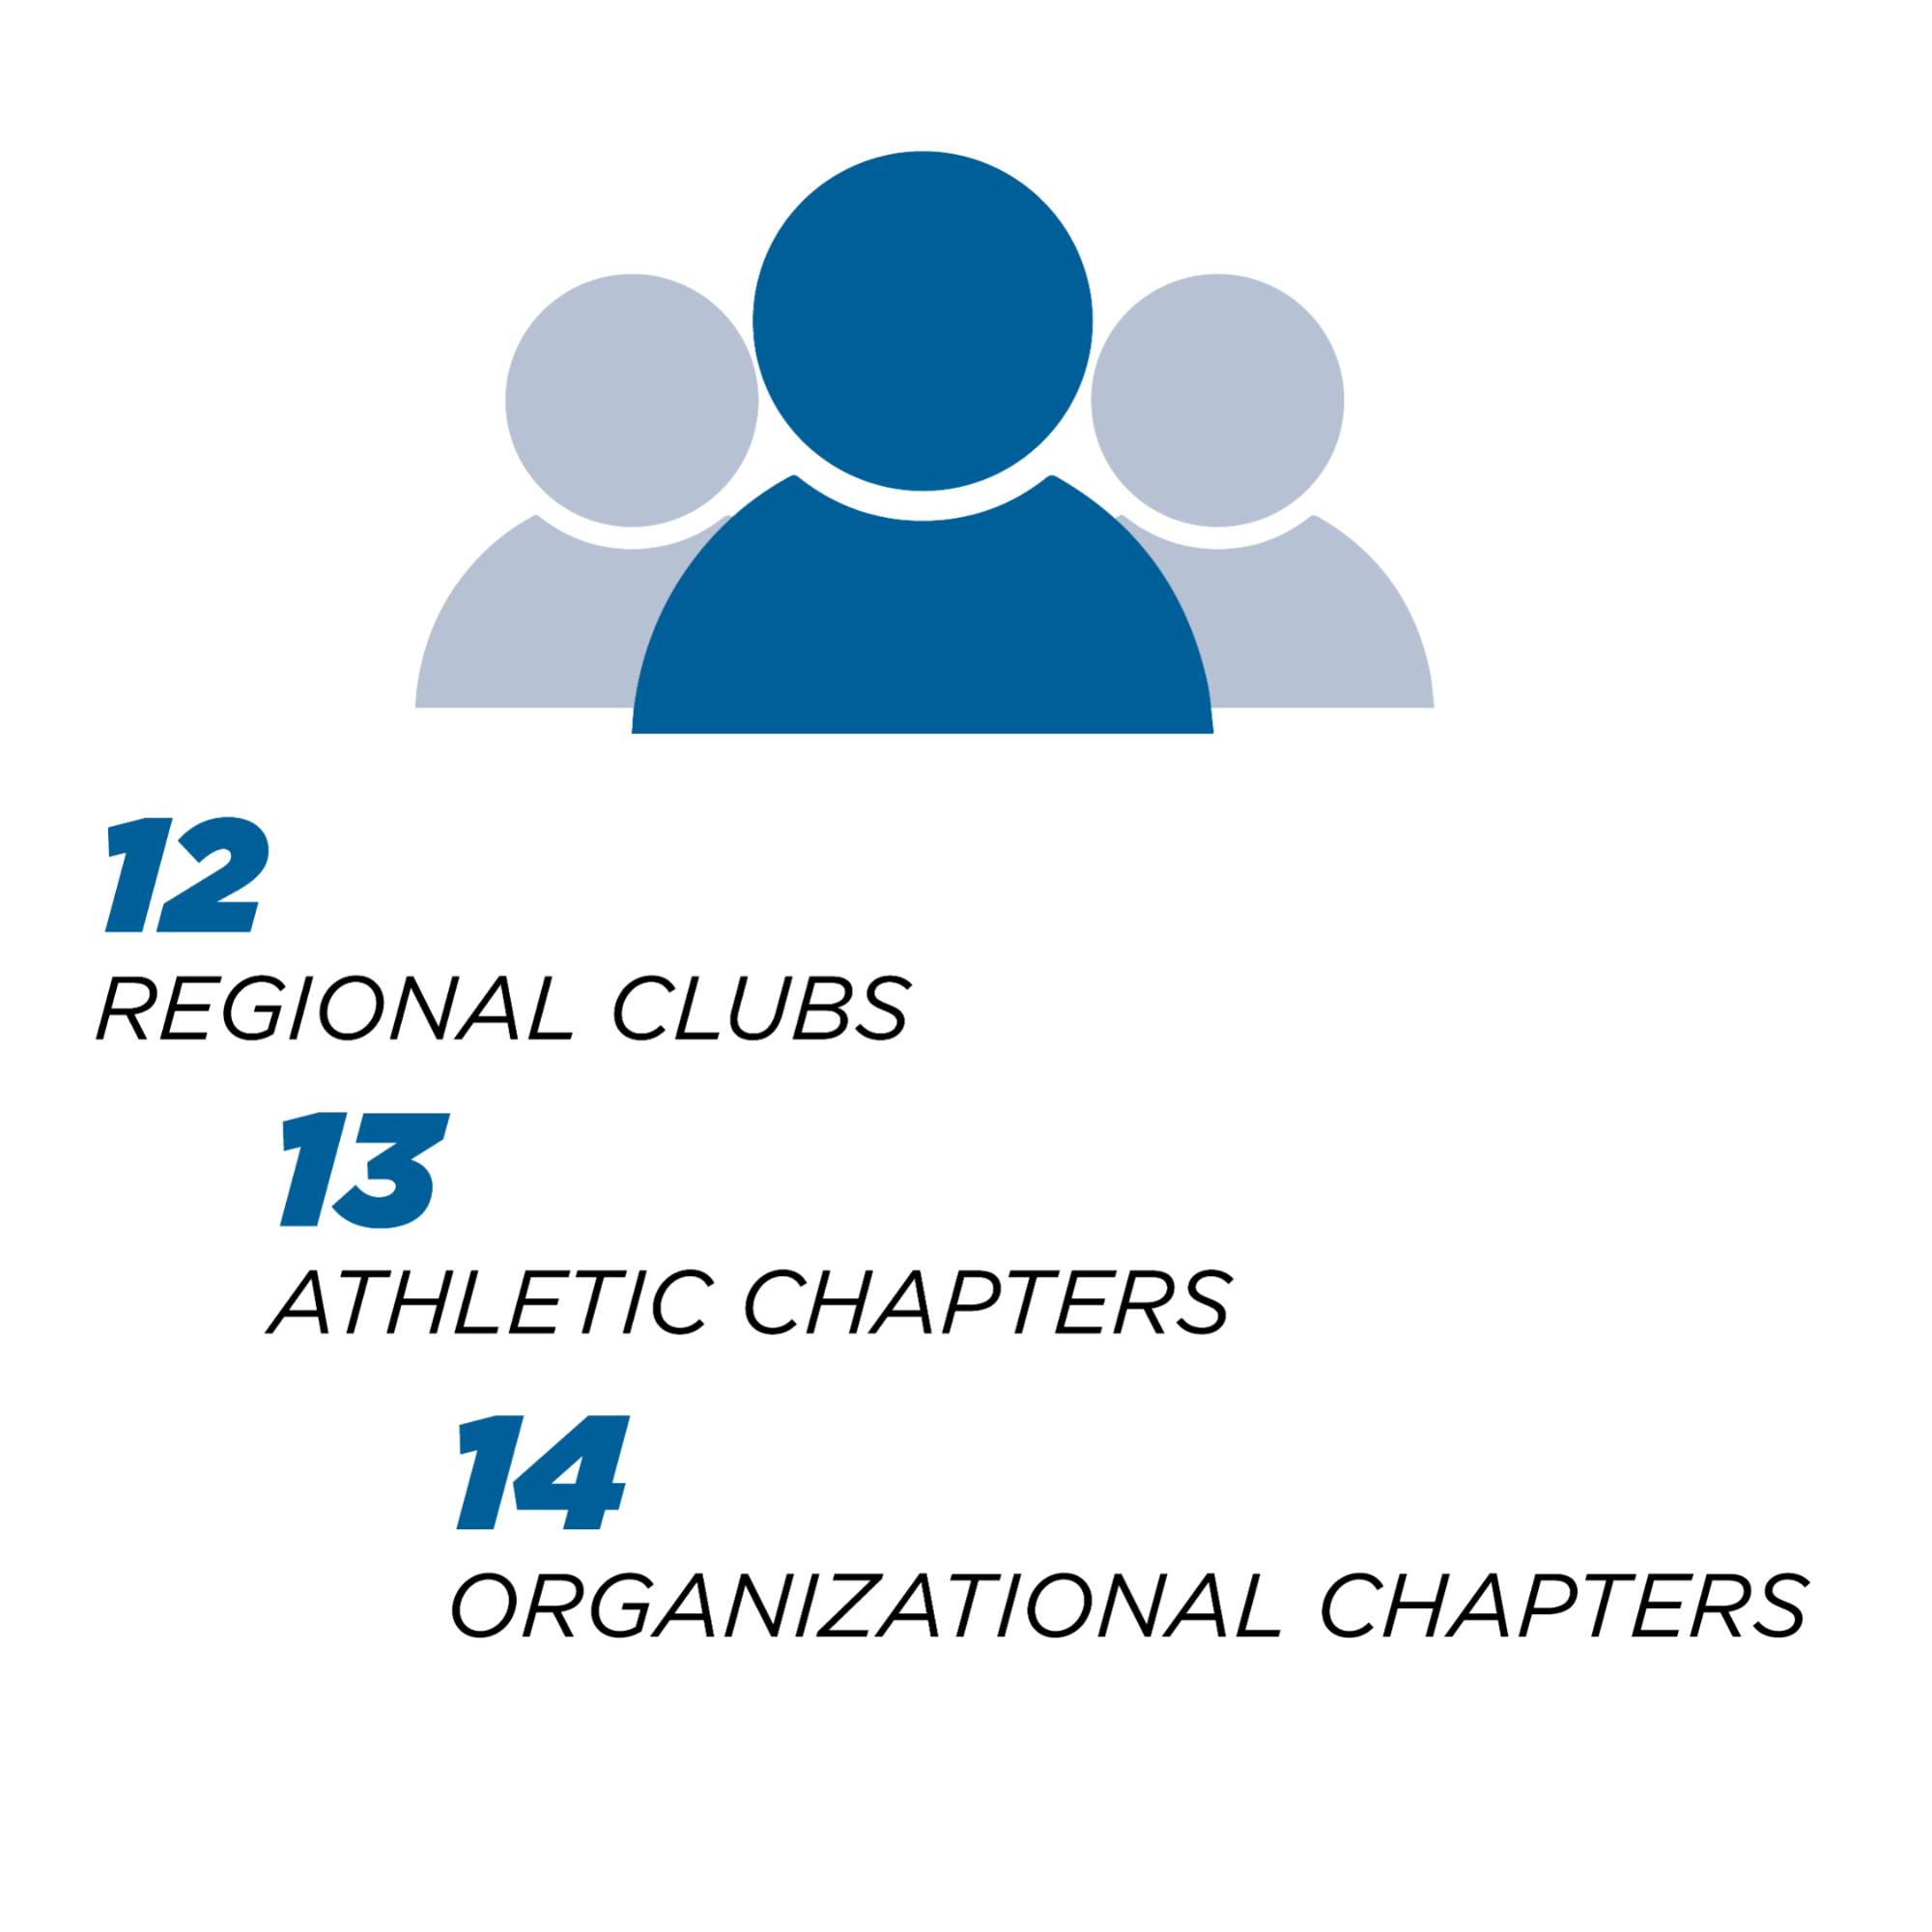 There are 12 Regional clubs, 13 Athletic Chapters, and 14 Organizational Chapters.